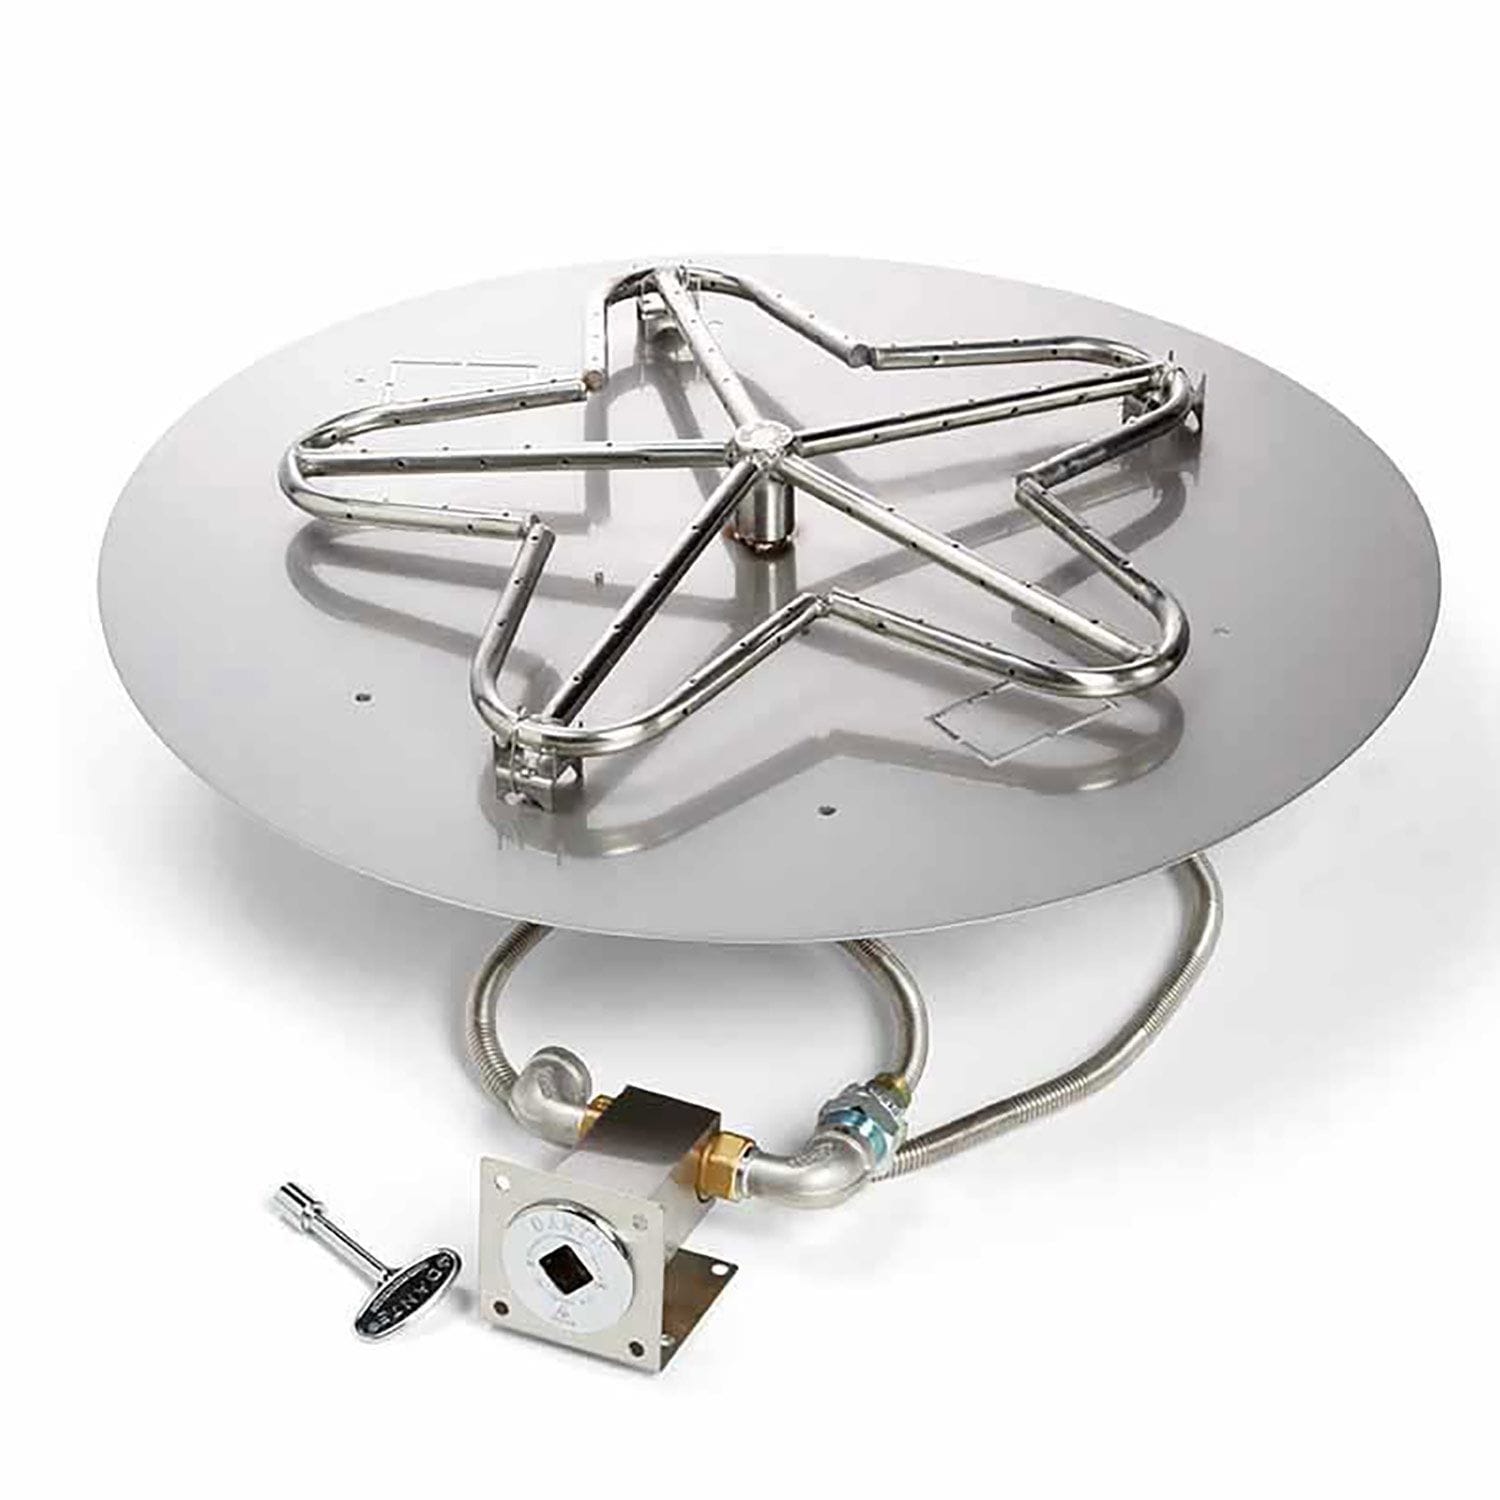 HPC Fire Standard Penta Burner with Round Flat Pan, Flex Line Kit, and Key Valve in White Background